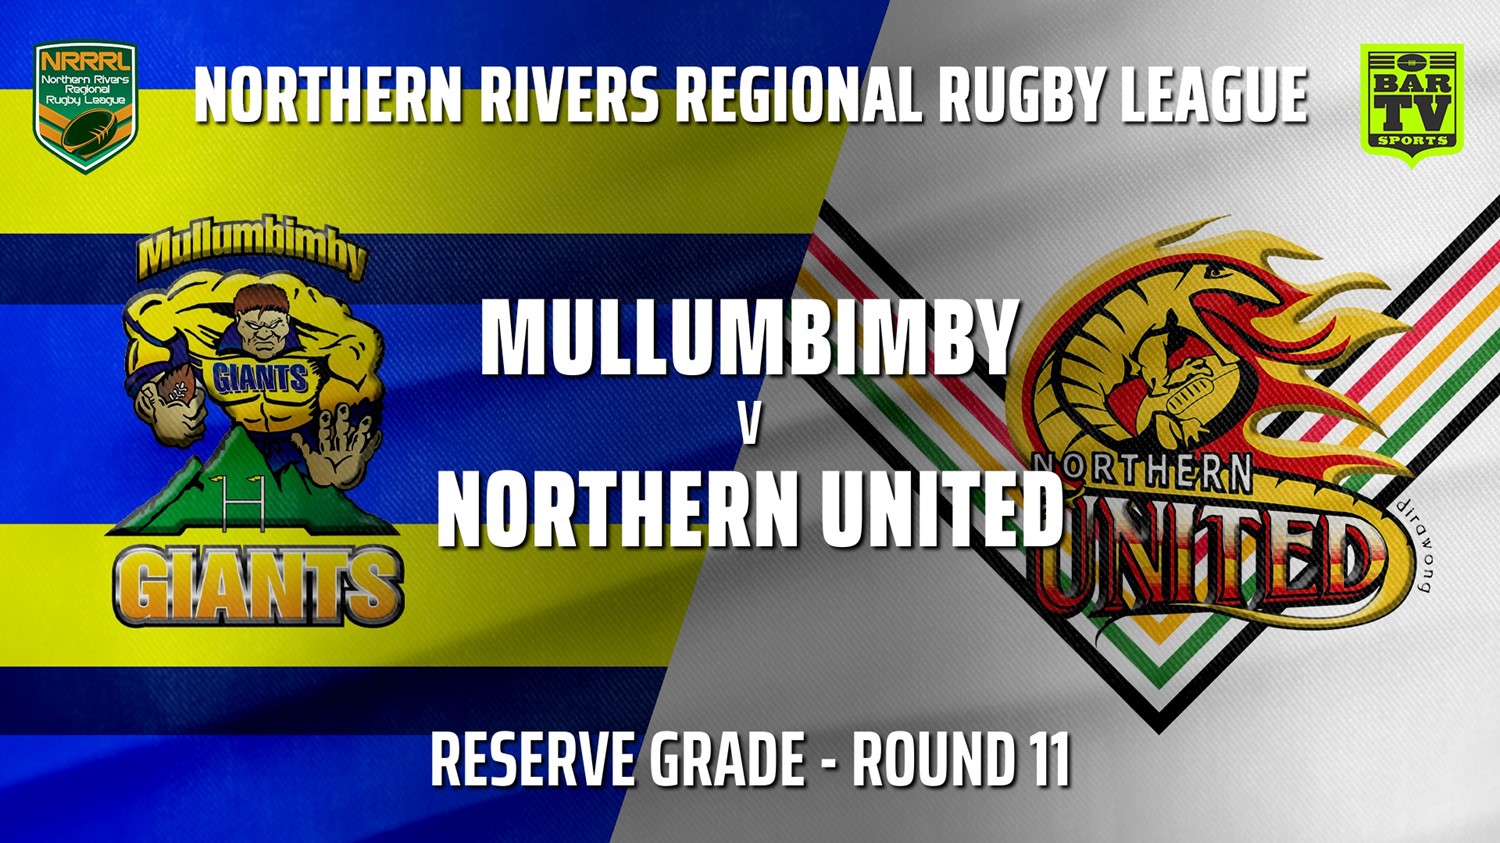 210718-Northern Rivers Round 11 - Reserve Grade - Mullumbimby Giants v Northern United Slate Image